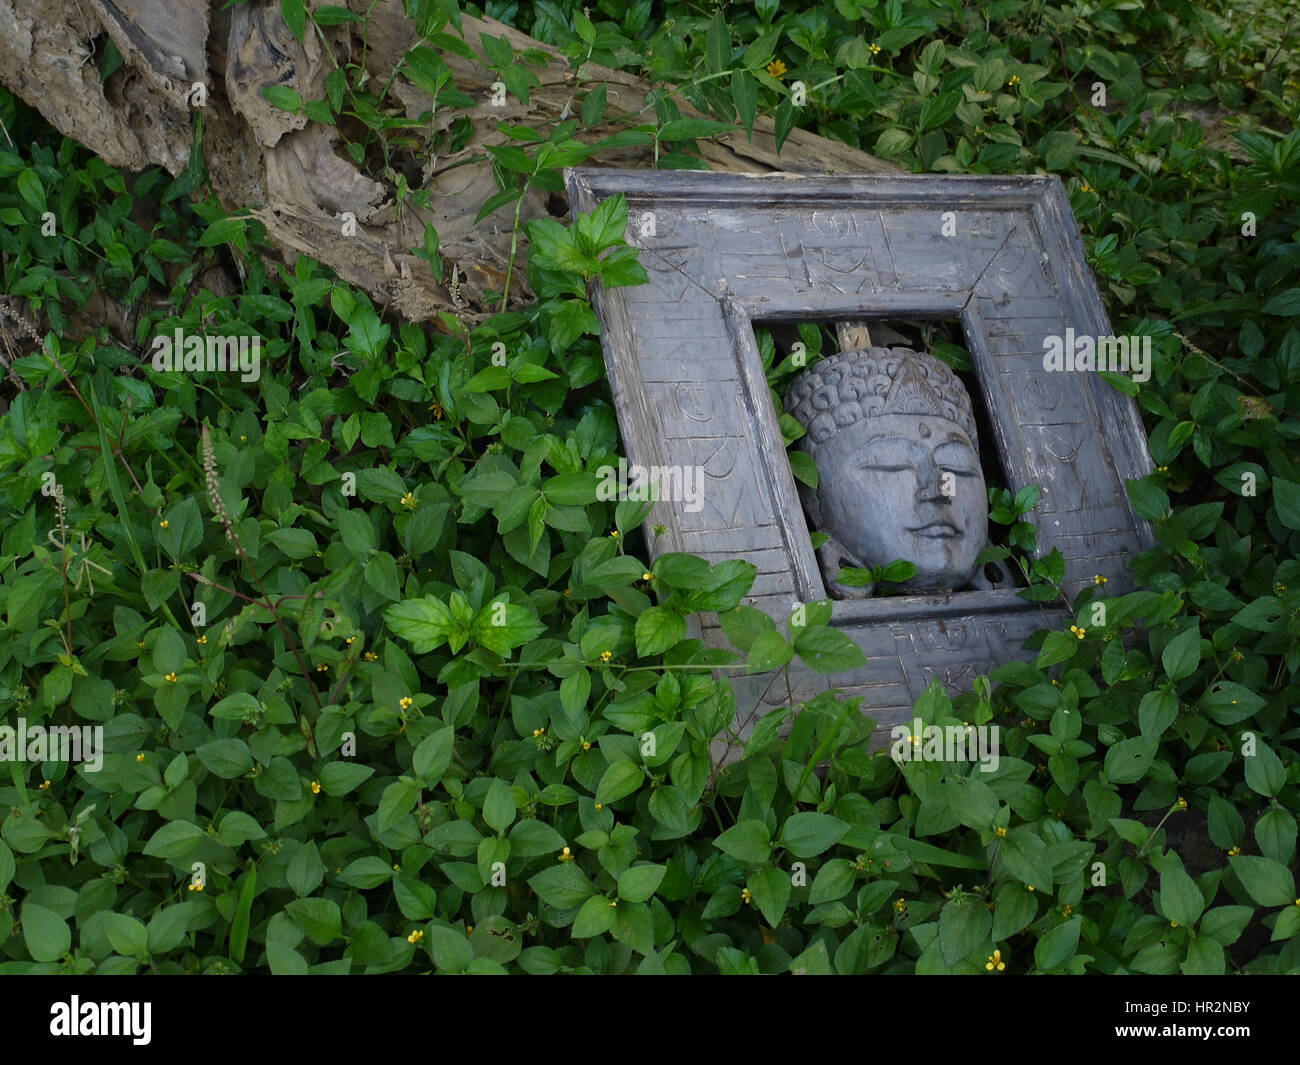 Old carved wooden mural with Buddha face image covered with plants. Bali, Indonesia Stock Photo